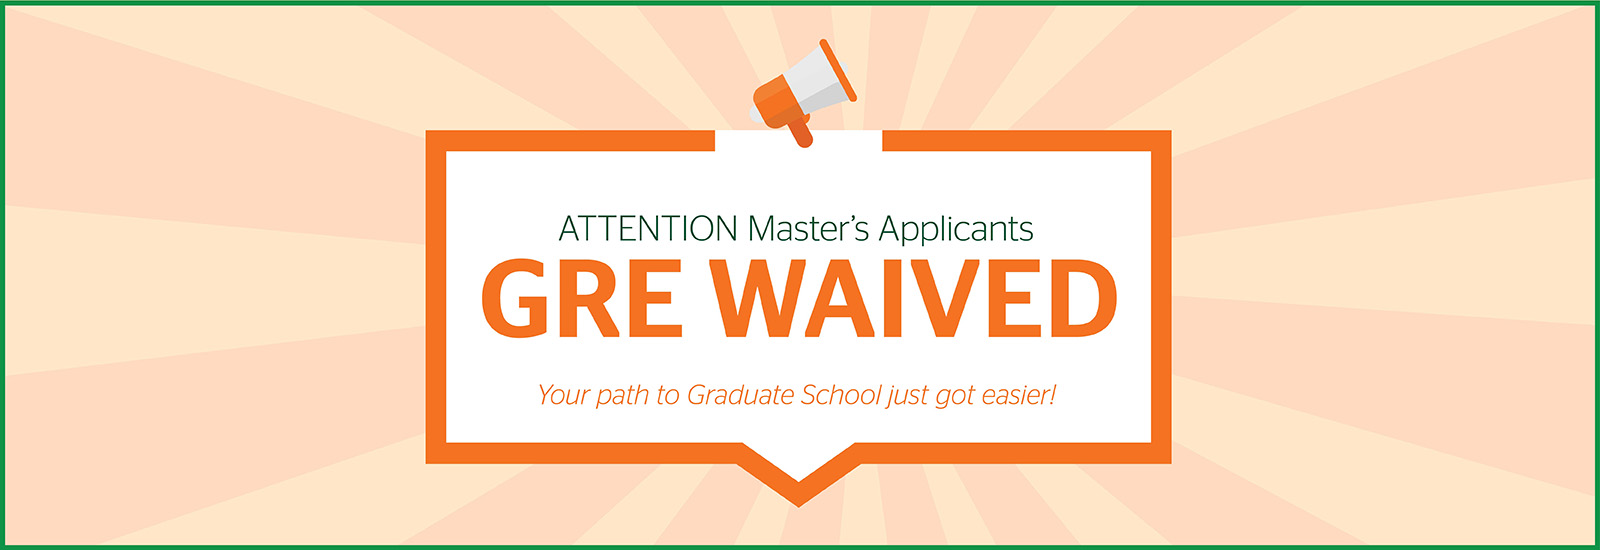 This is a graphic design. The Master of Science in Data Science program does not require its applicants to submit GRE scores.